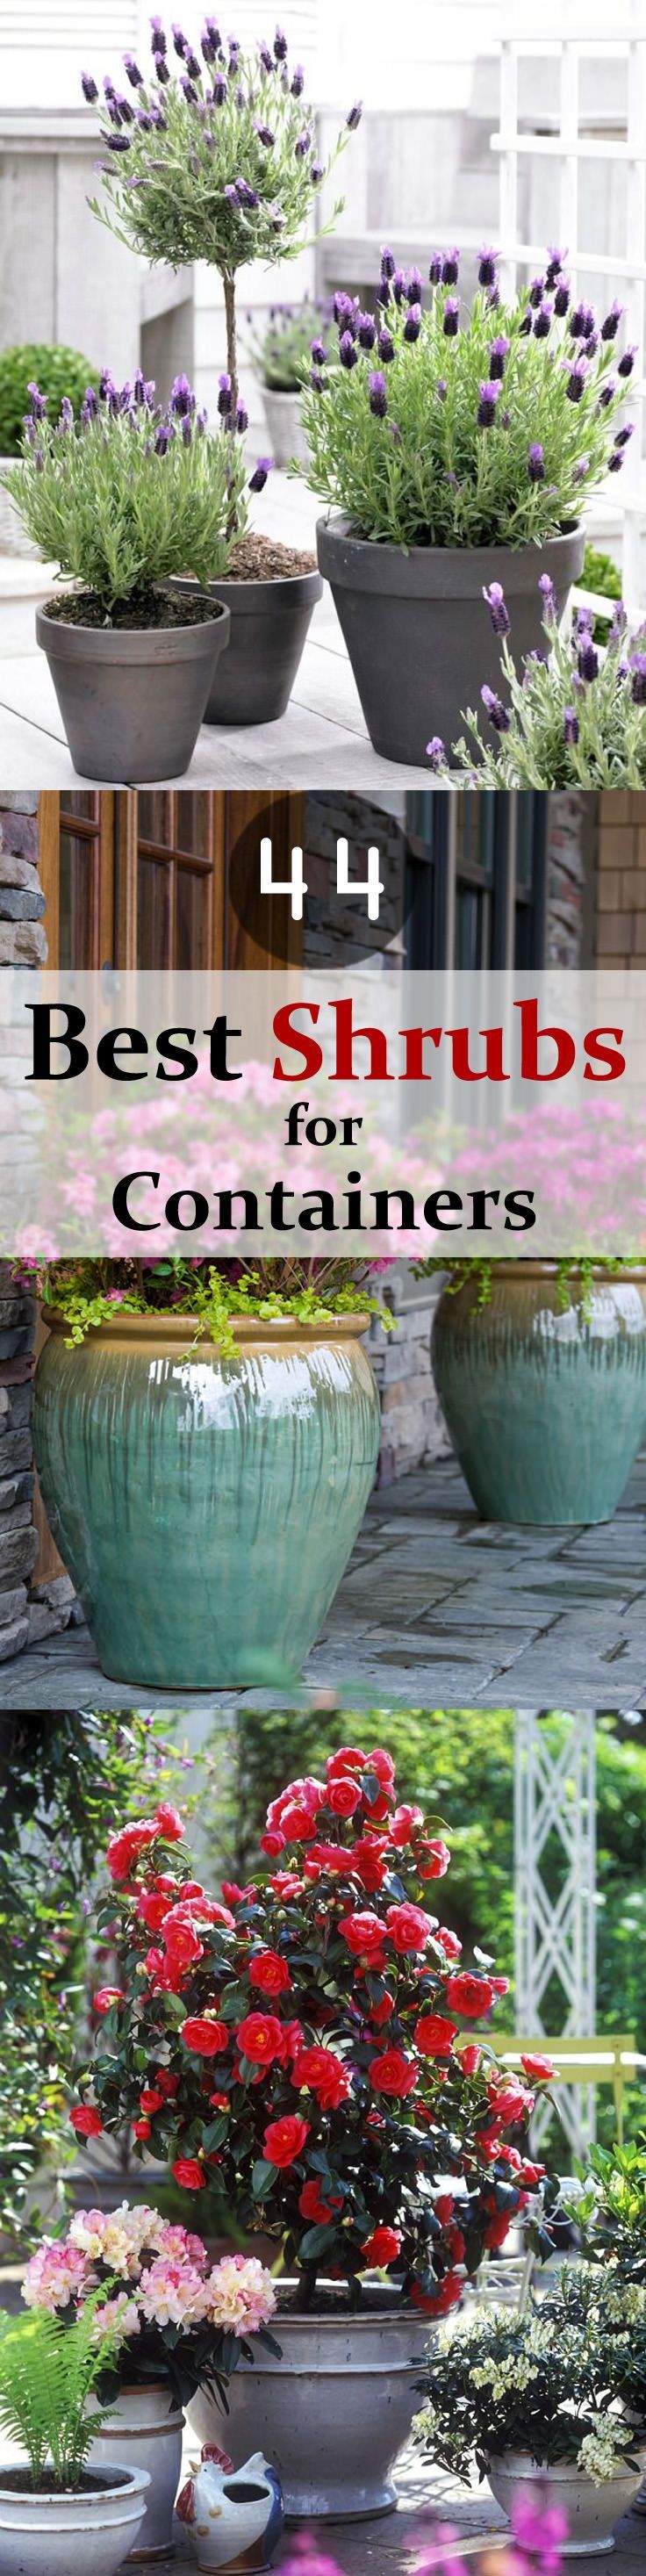 44 Best Shrubs for Containers